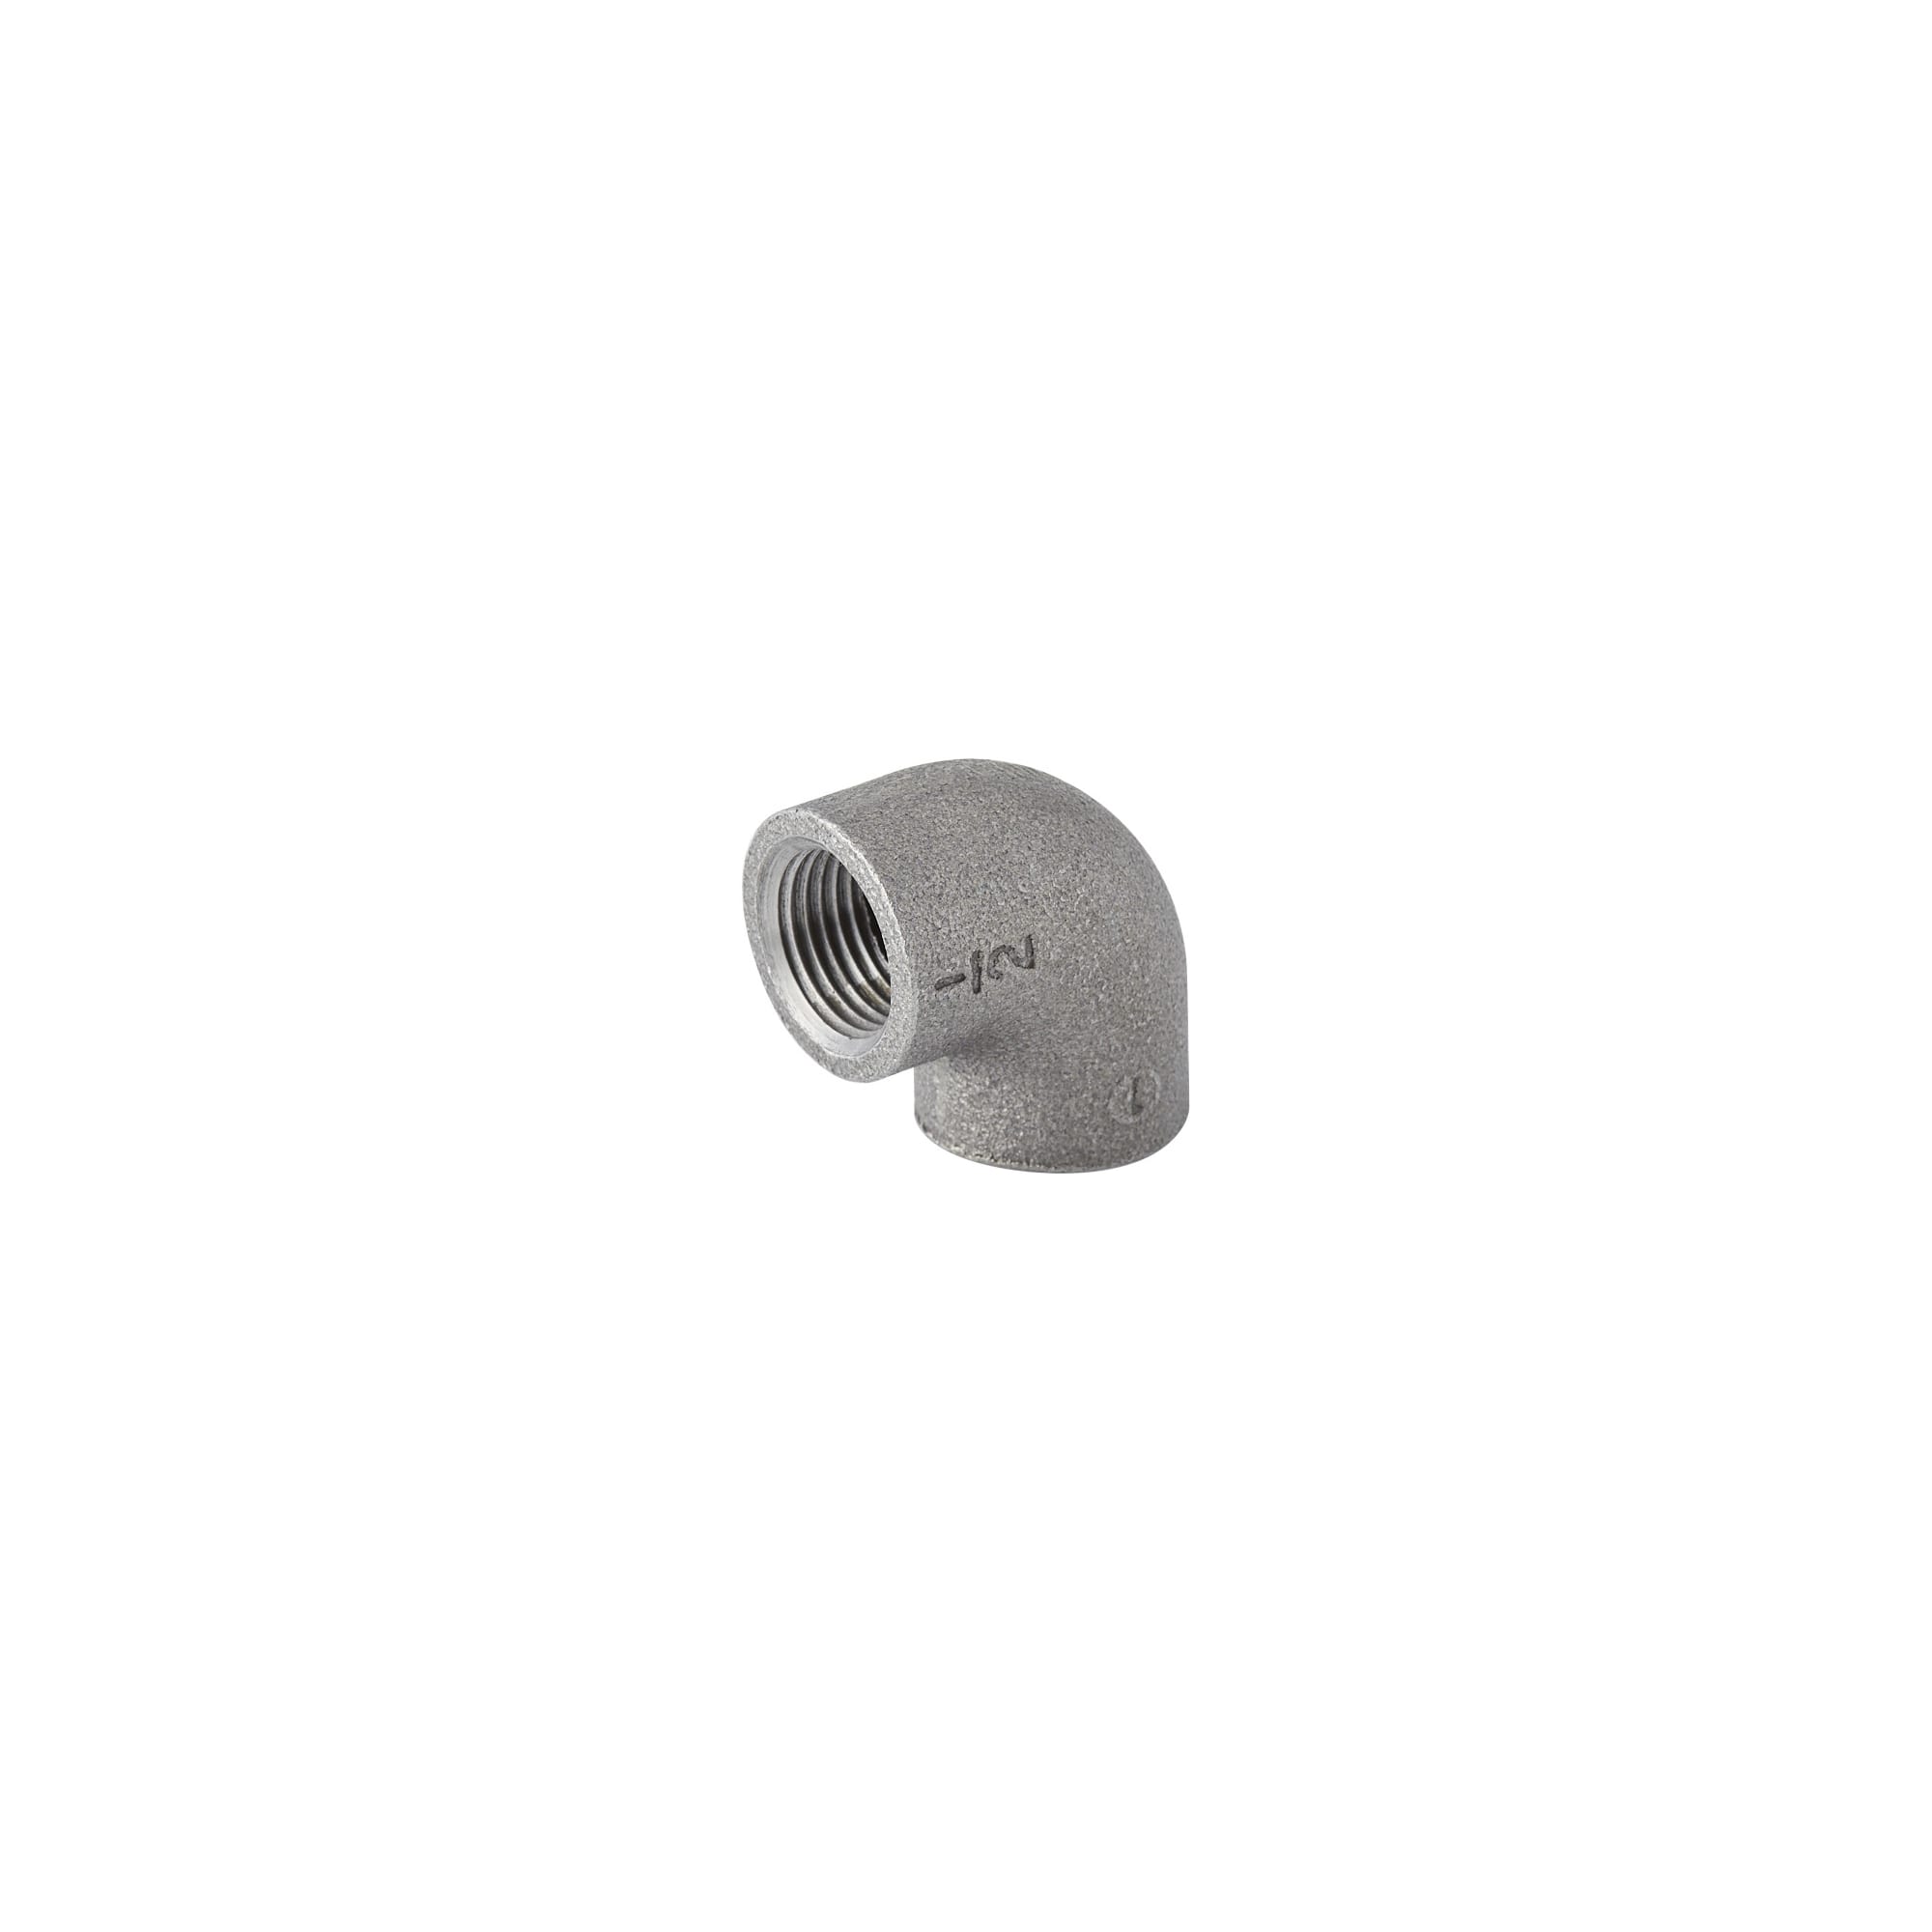 90 Degree Elbow Pipe Fitting for Fire-Protection - Female, Steel